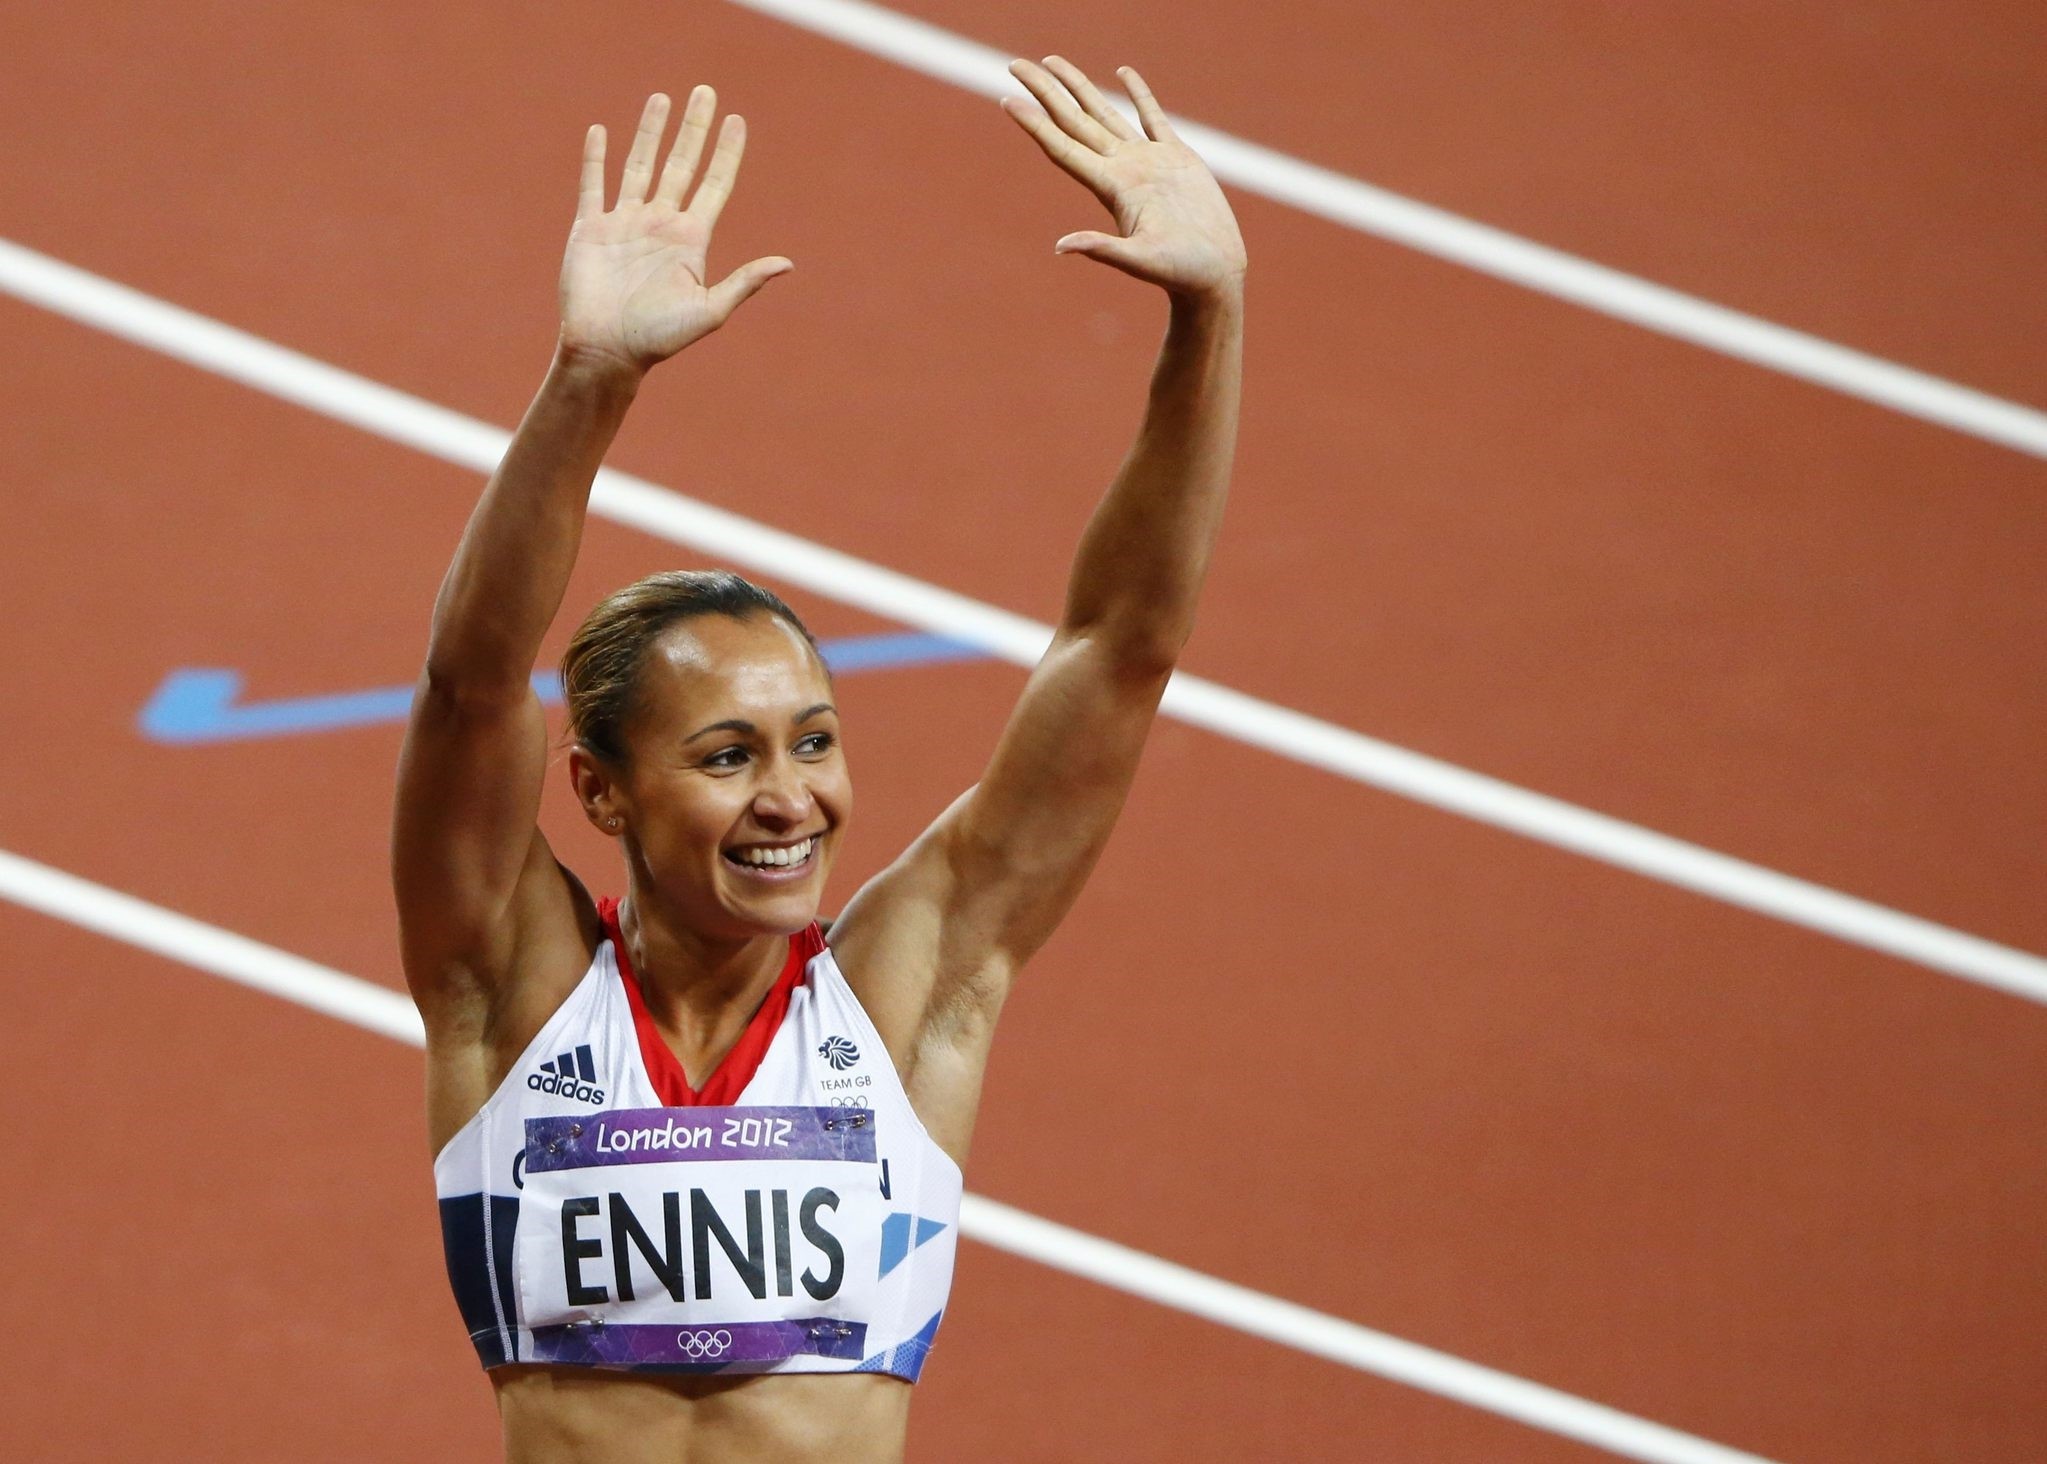 Britain's Jessica Ennis celebrates after finishing first in her women's heptathlon 200m heat at the London 2012 Olympic Games at the Olympic Stadium August 3, 2012. (REUTERS Photo)